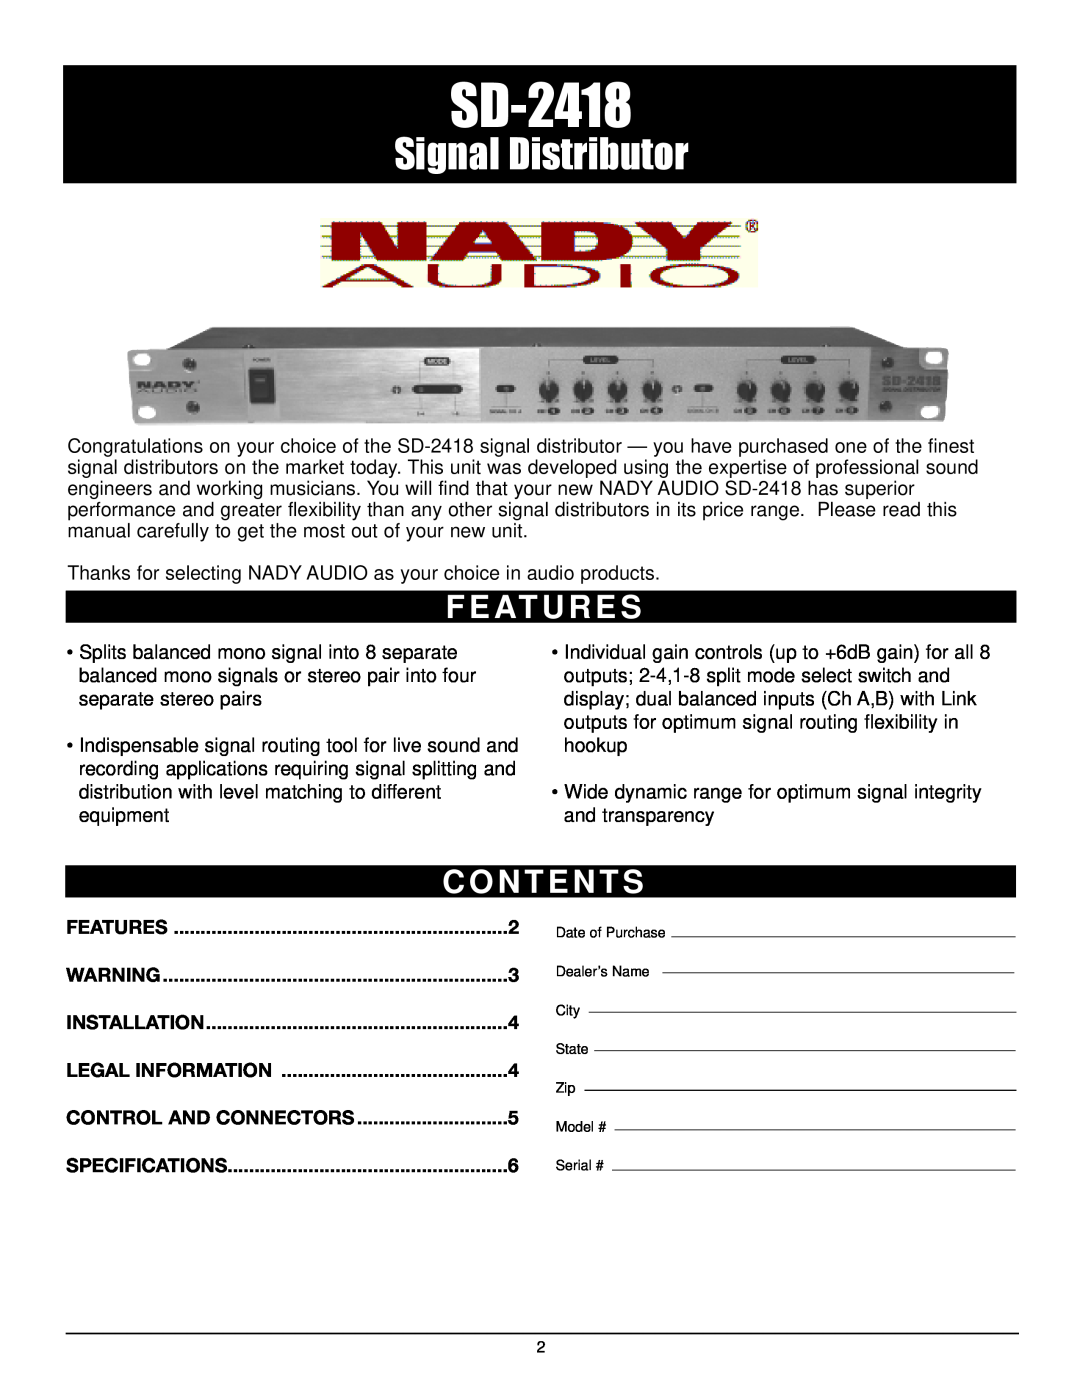 Nady Systems SD-2418 F E At U R E S, C O N T E N T S, Signal Distributor, Features, Installation, Legal Information 